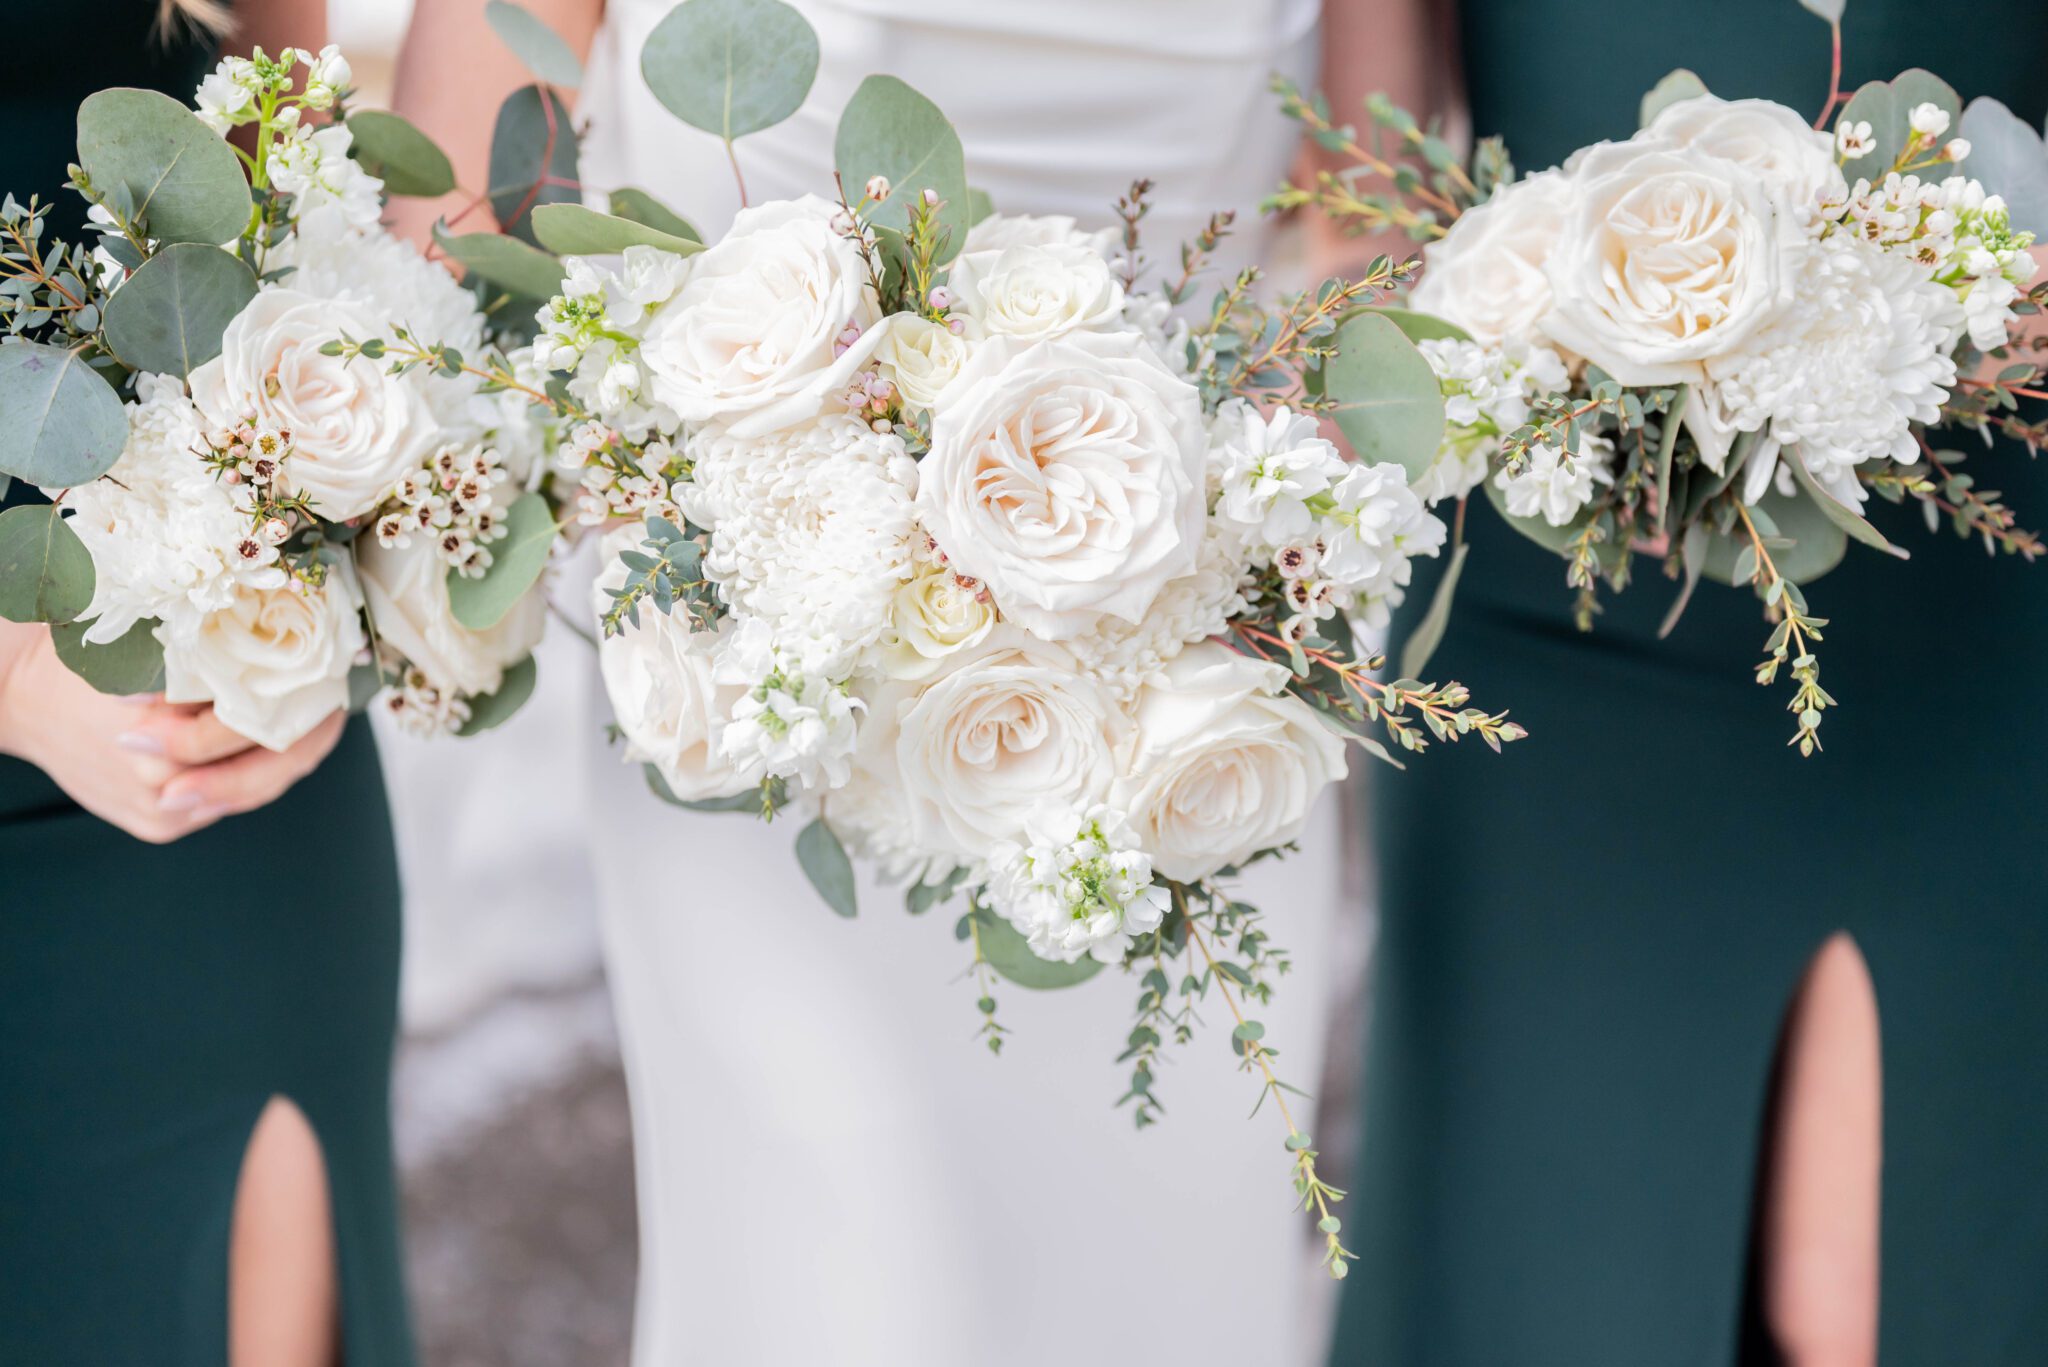 Classic colour palette of white florals and greenery in these bride and bridesmaid bouquets, designed by Floral Chix.